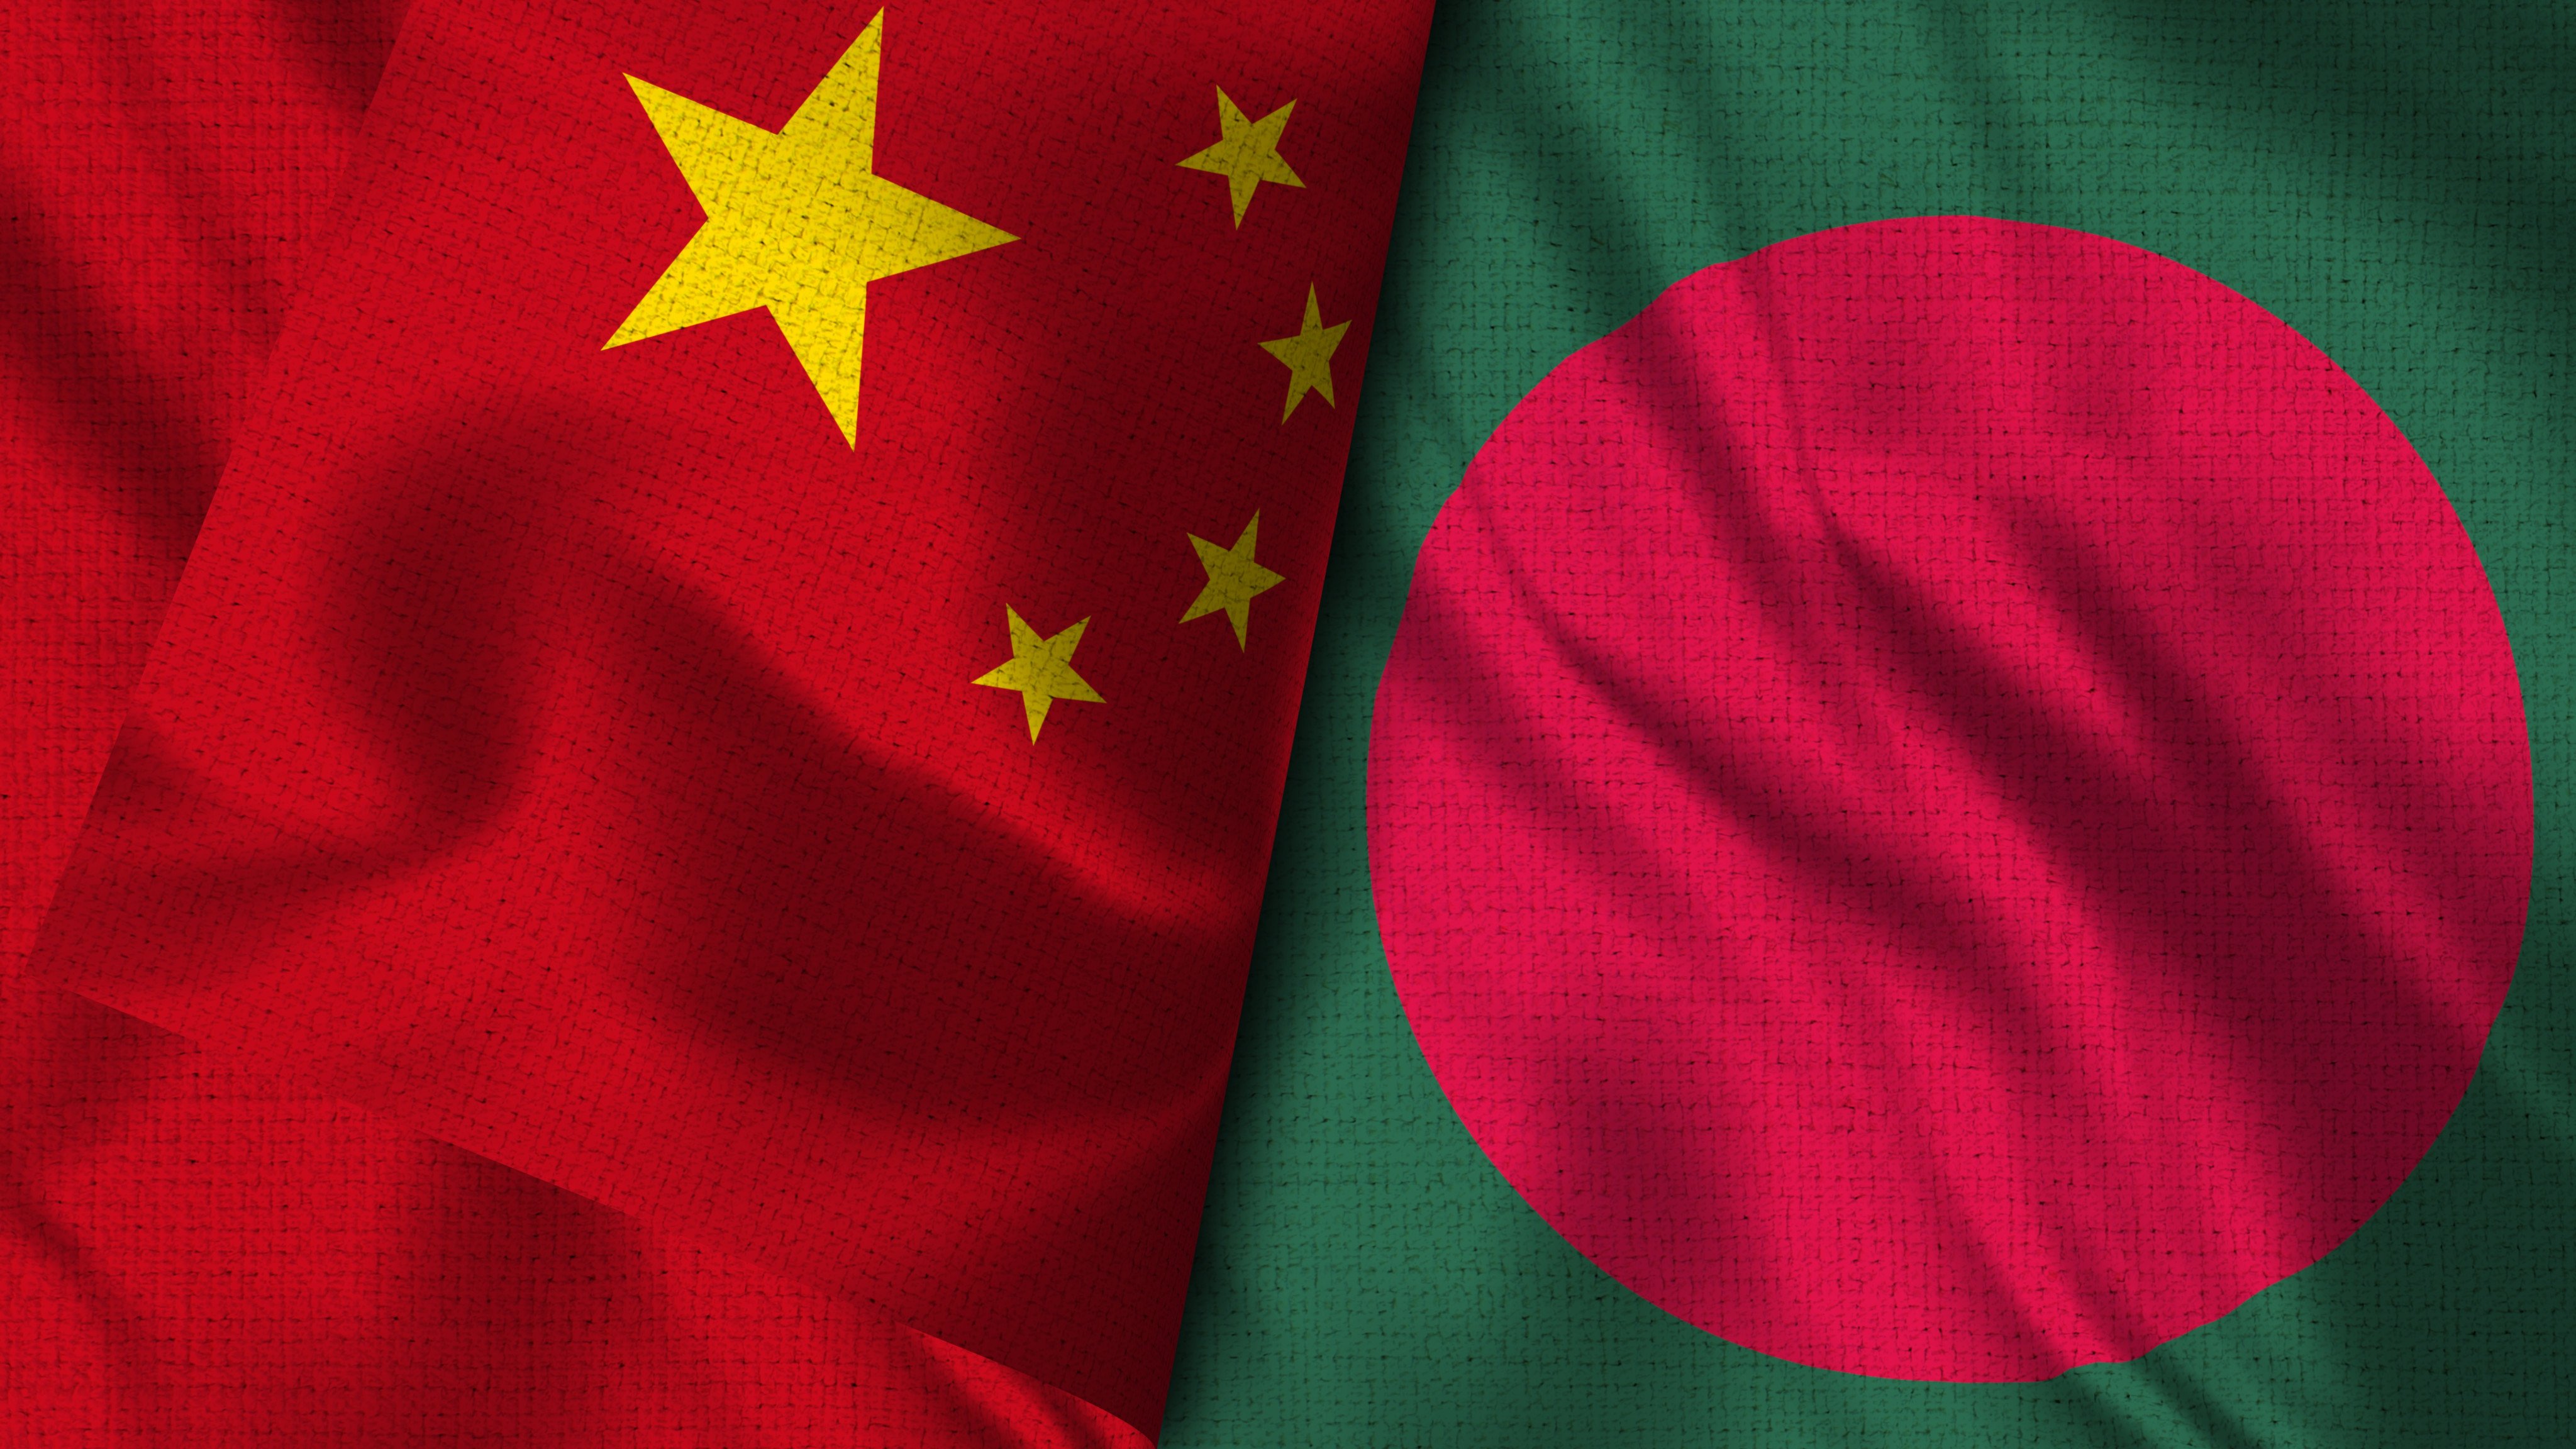 Bangladesh is letting authorised banks settle trade deals in China’s yuan, as an alternative to the strengthening US dollar. Photo: Shutterstock